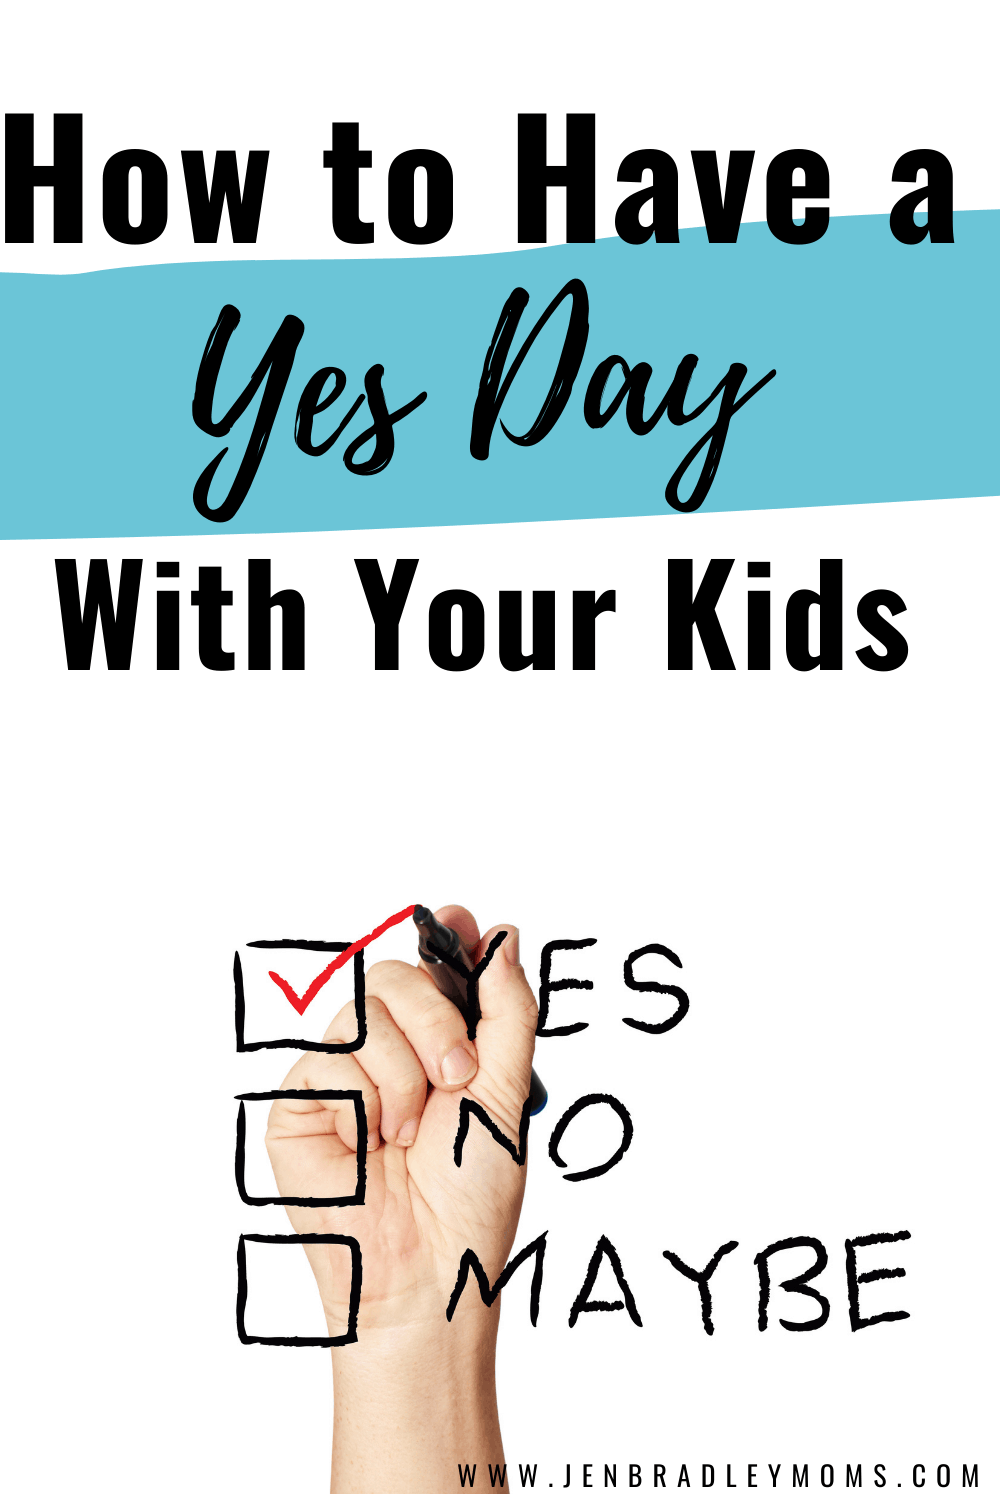 Yes Day for Kids - Pros and Cons (How to Make it Fun for Your Family!)